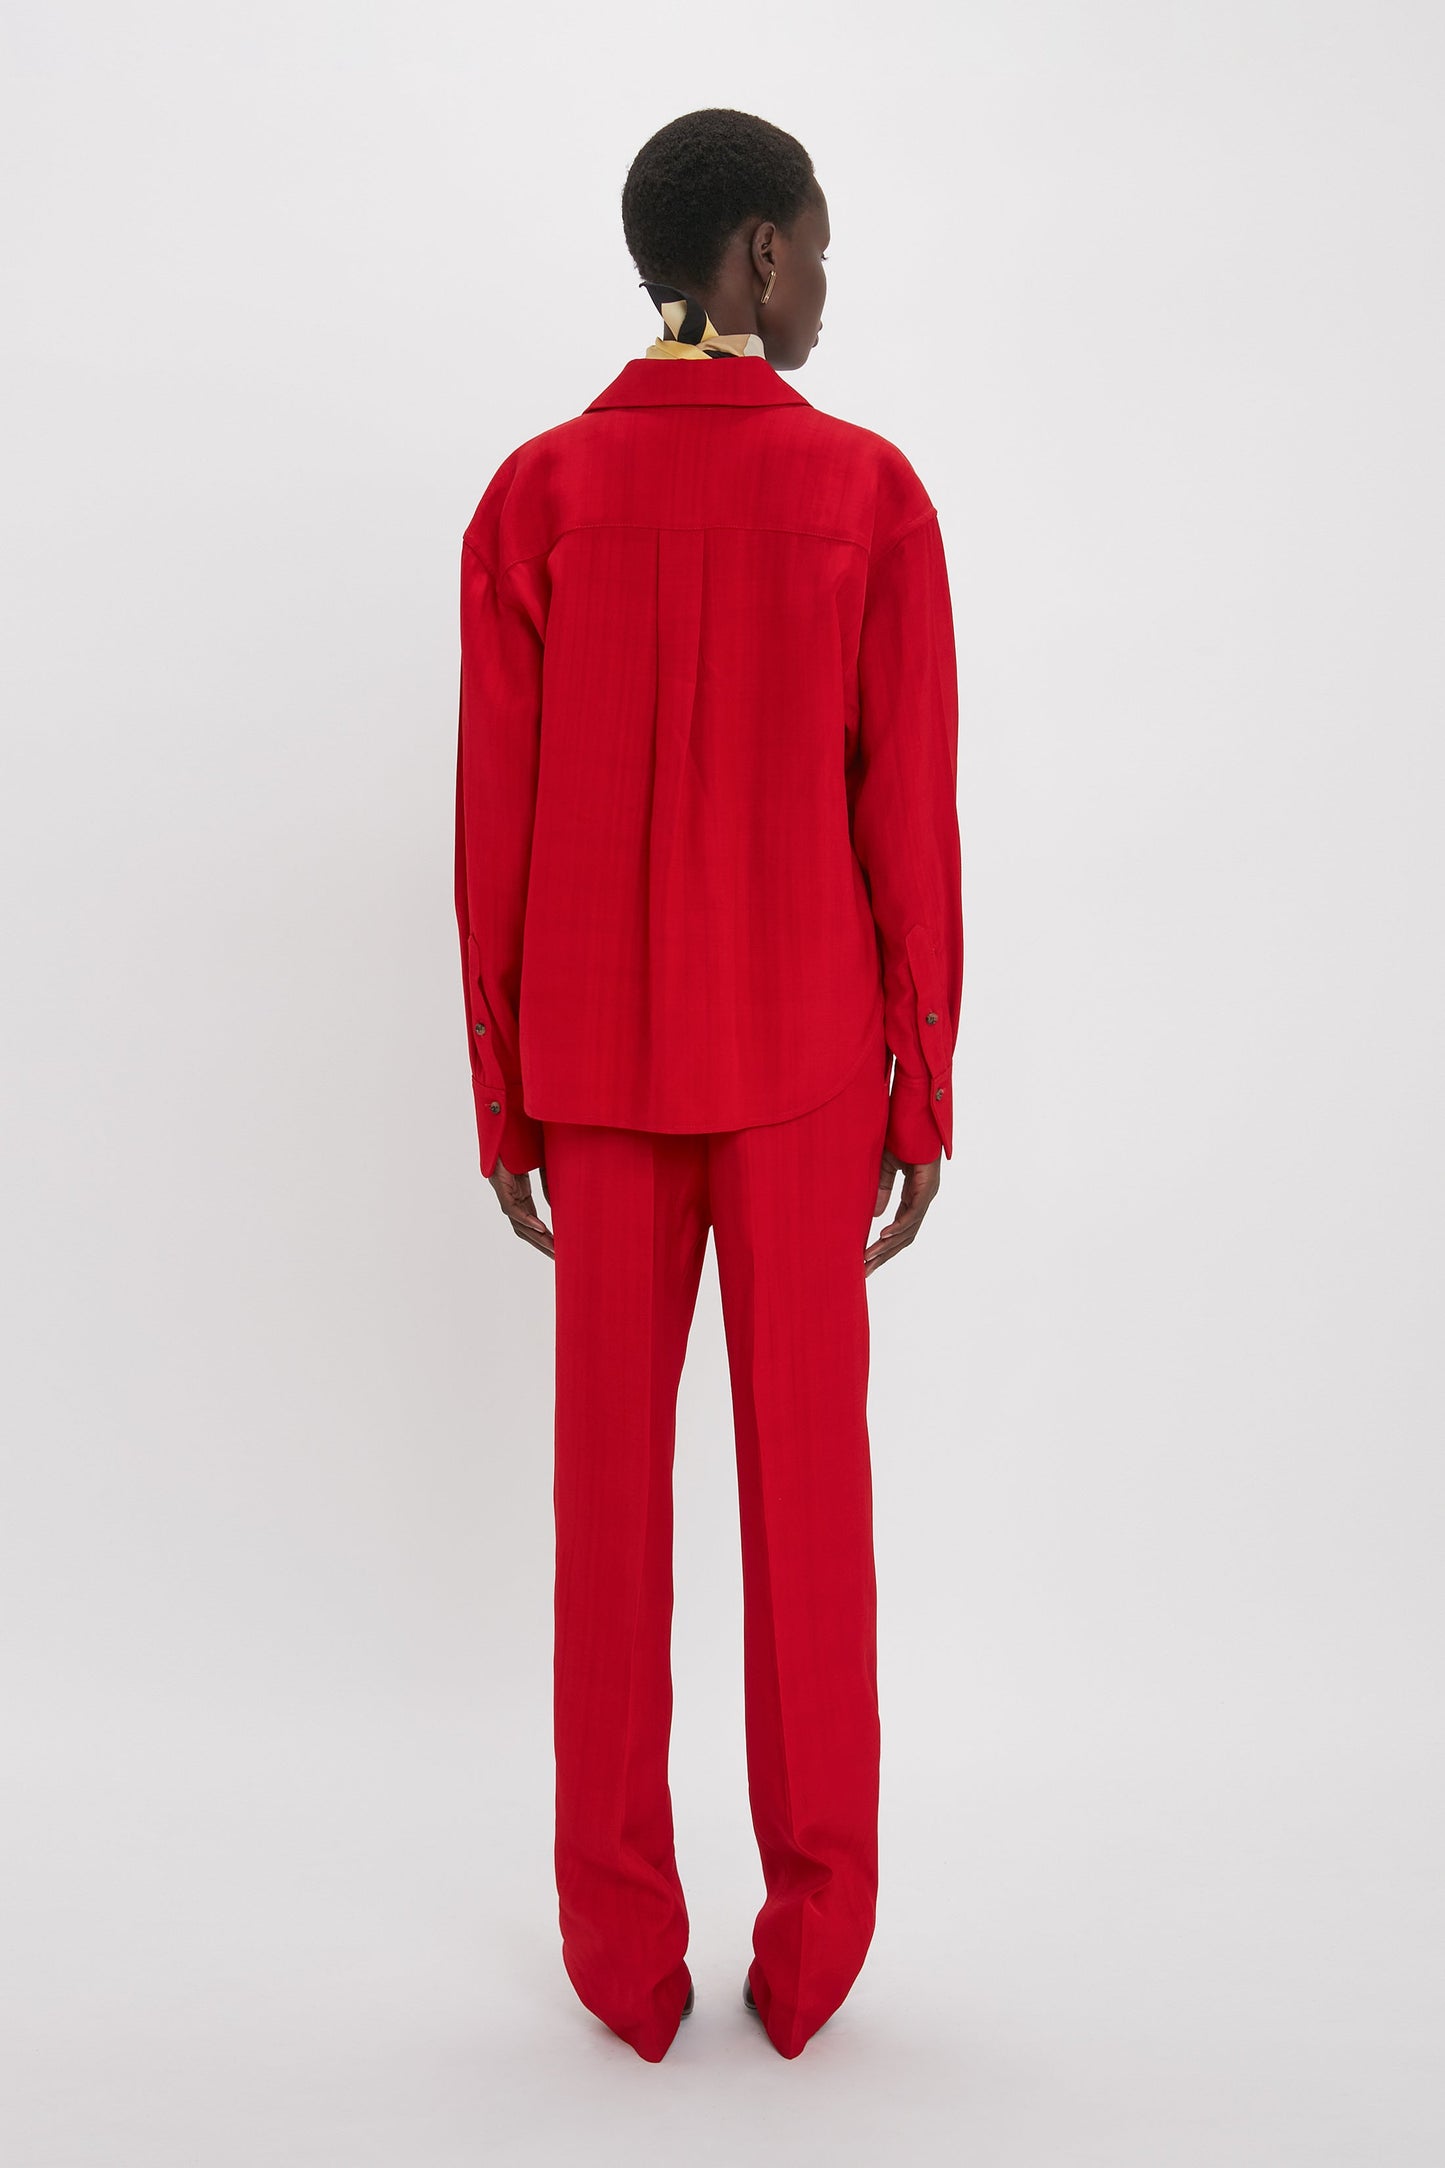 A person is standing against a plain background wearing a carmine long-sleeve shirt and matching Tapered Leg Trouser In Carmine by Victoria Beckham, facing away from the camera.